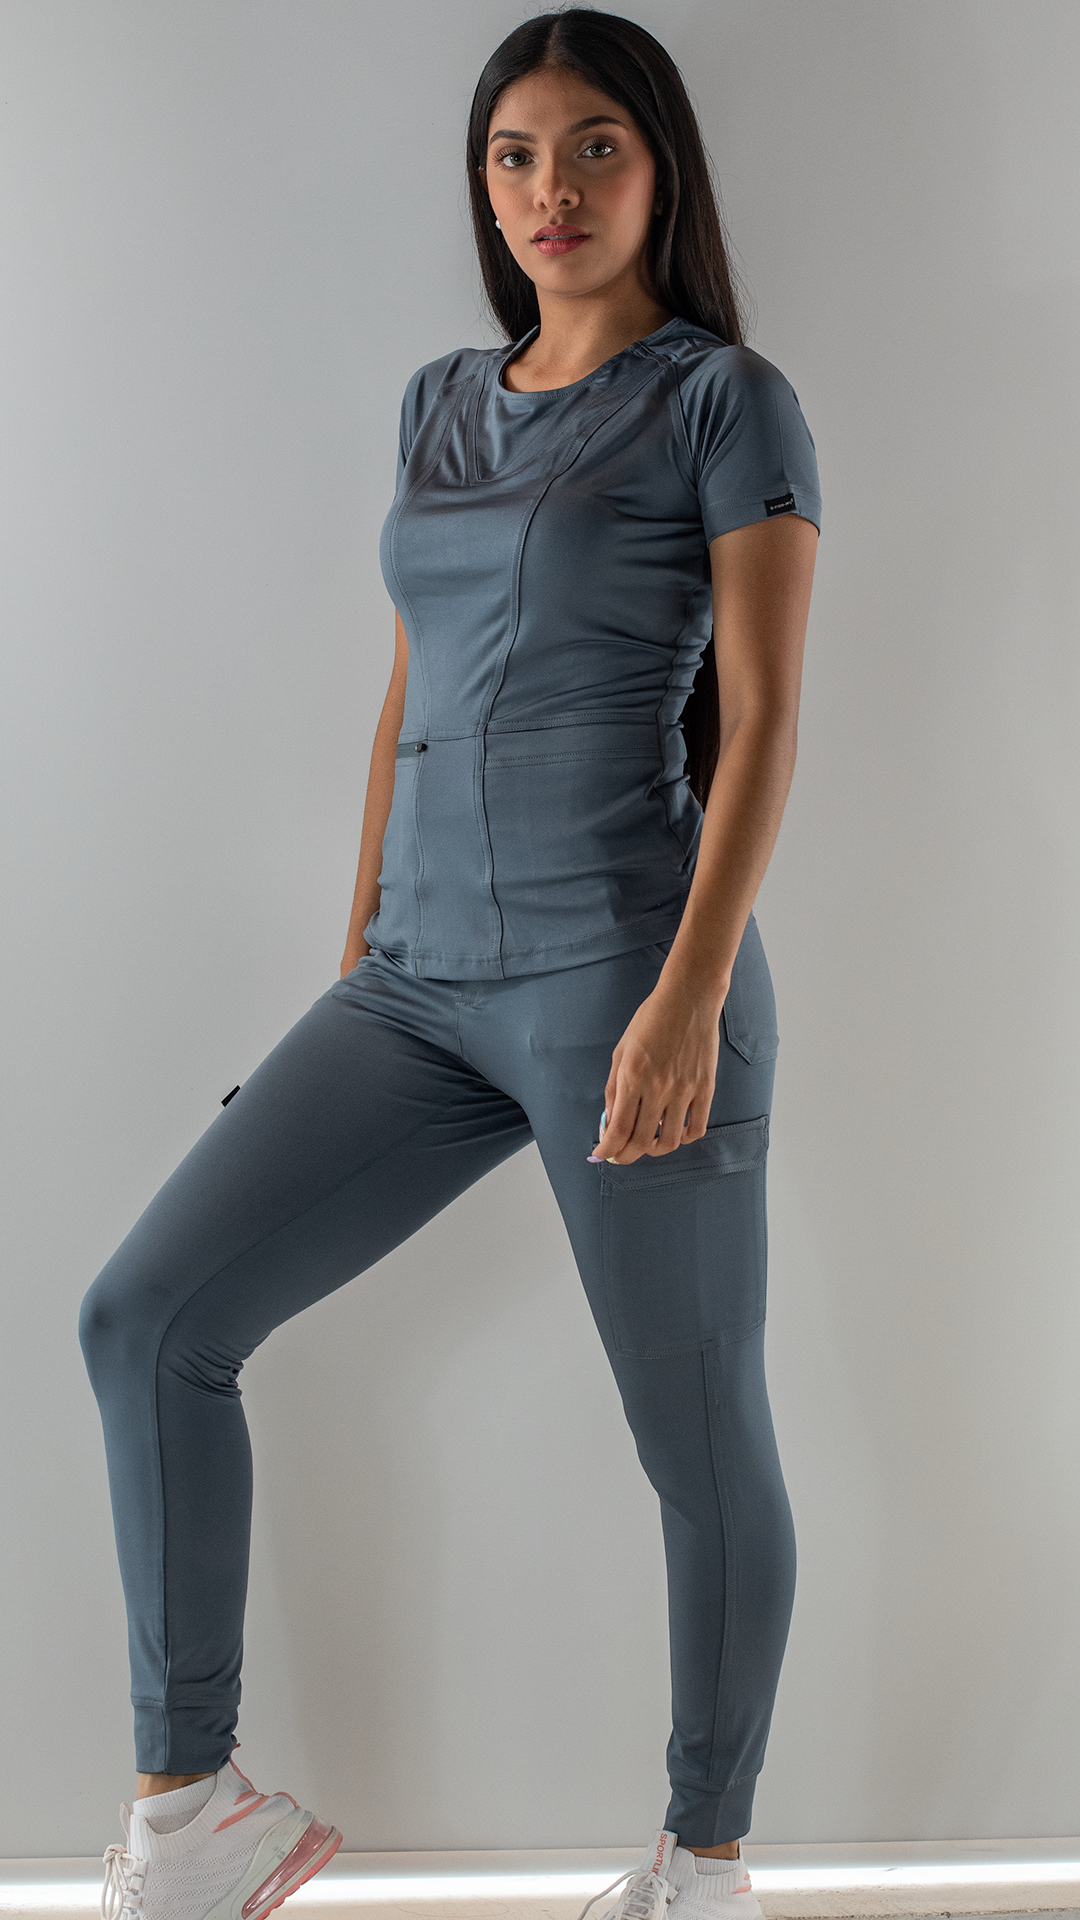 Women’s Jogger 901 Super Stretch Stormy weather